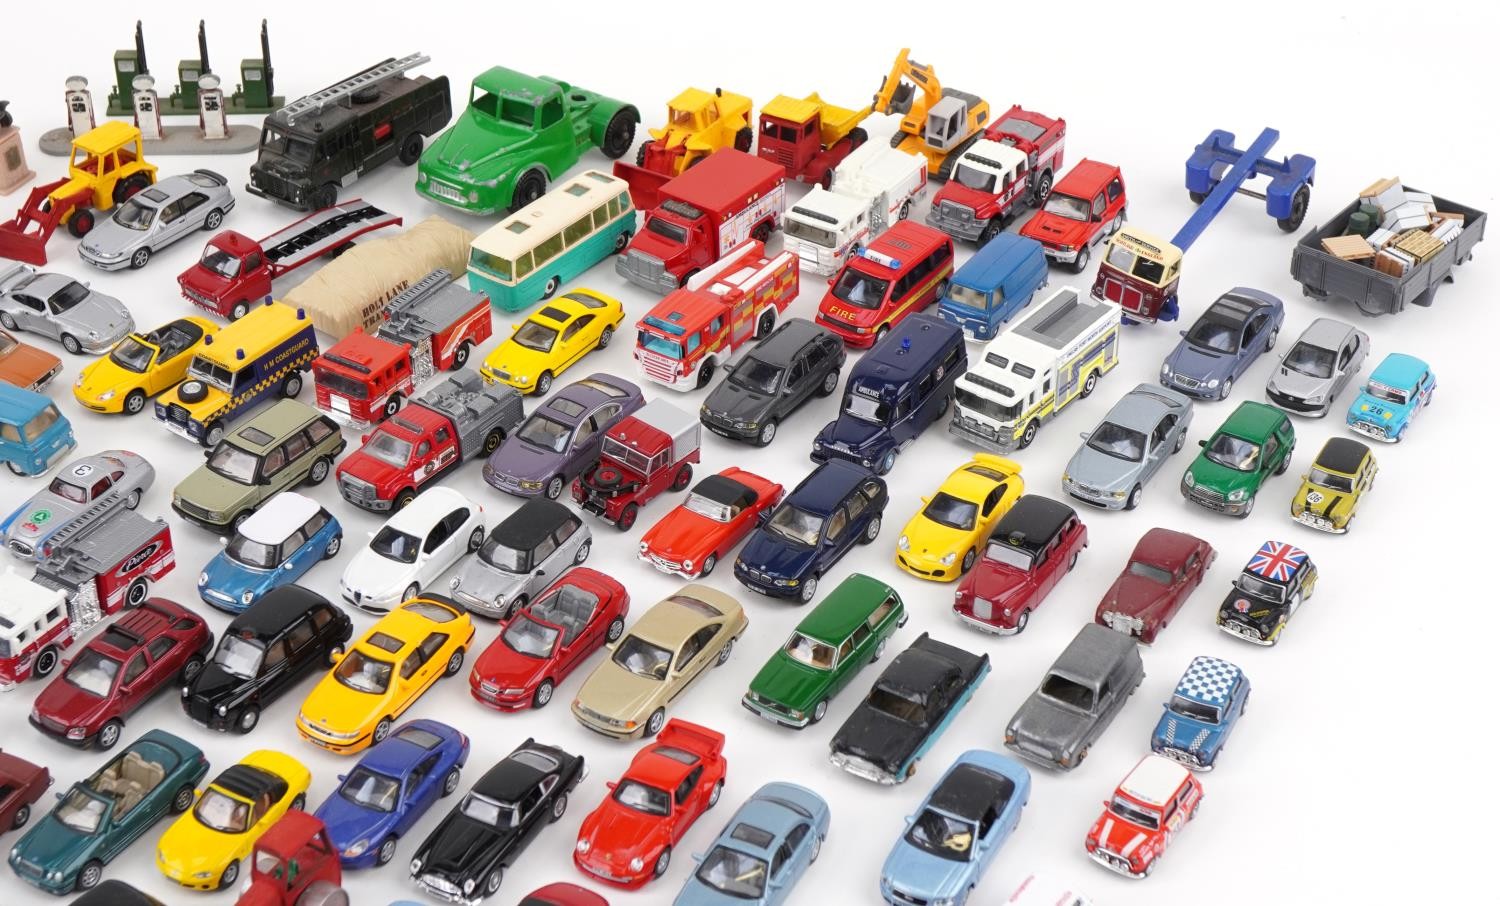 Large collection of vintage and later diecast vehicles including Corgi, Matchbox and Hot Wheels - Image 3 of 5